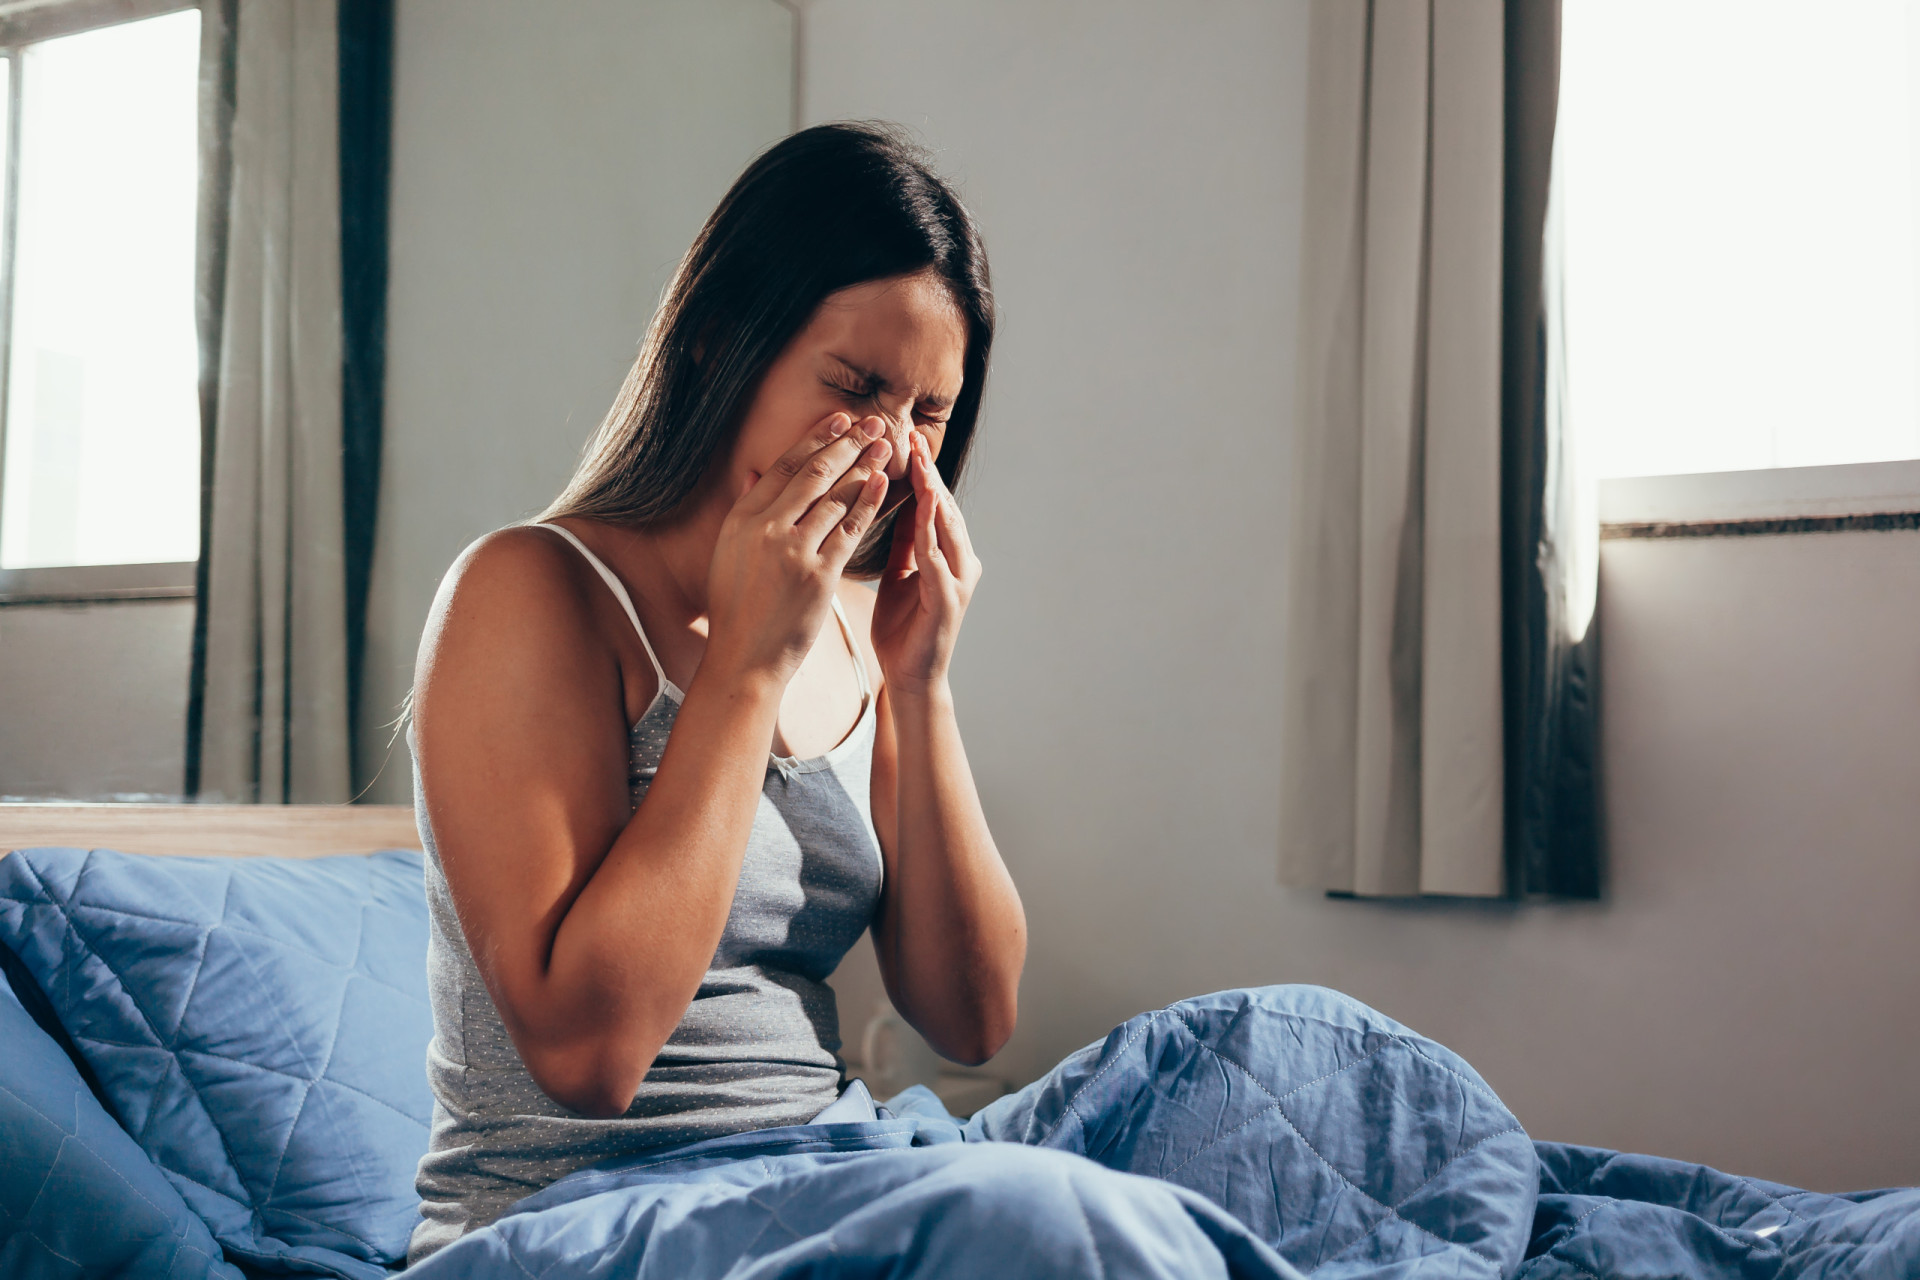 Sinus infection, cold, or allergies: how to tell the difference?